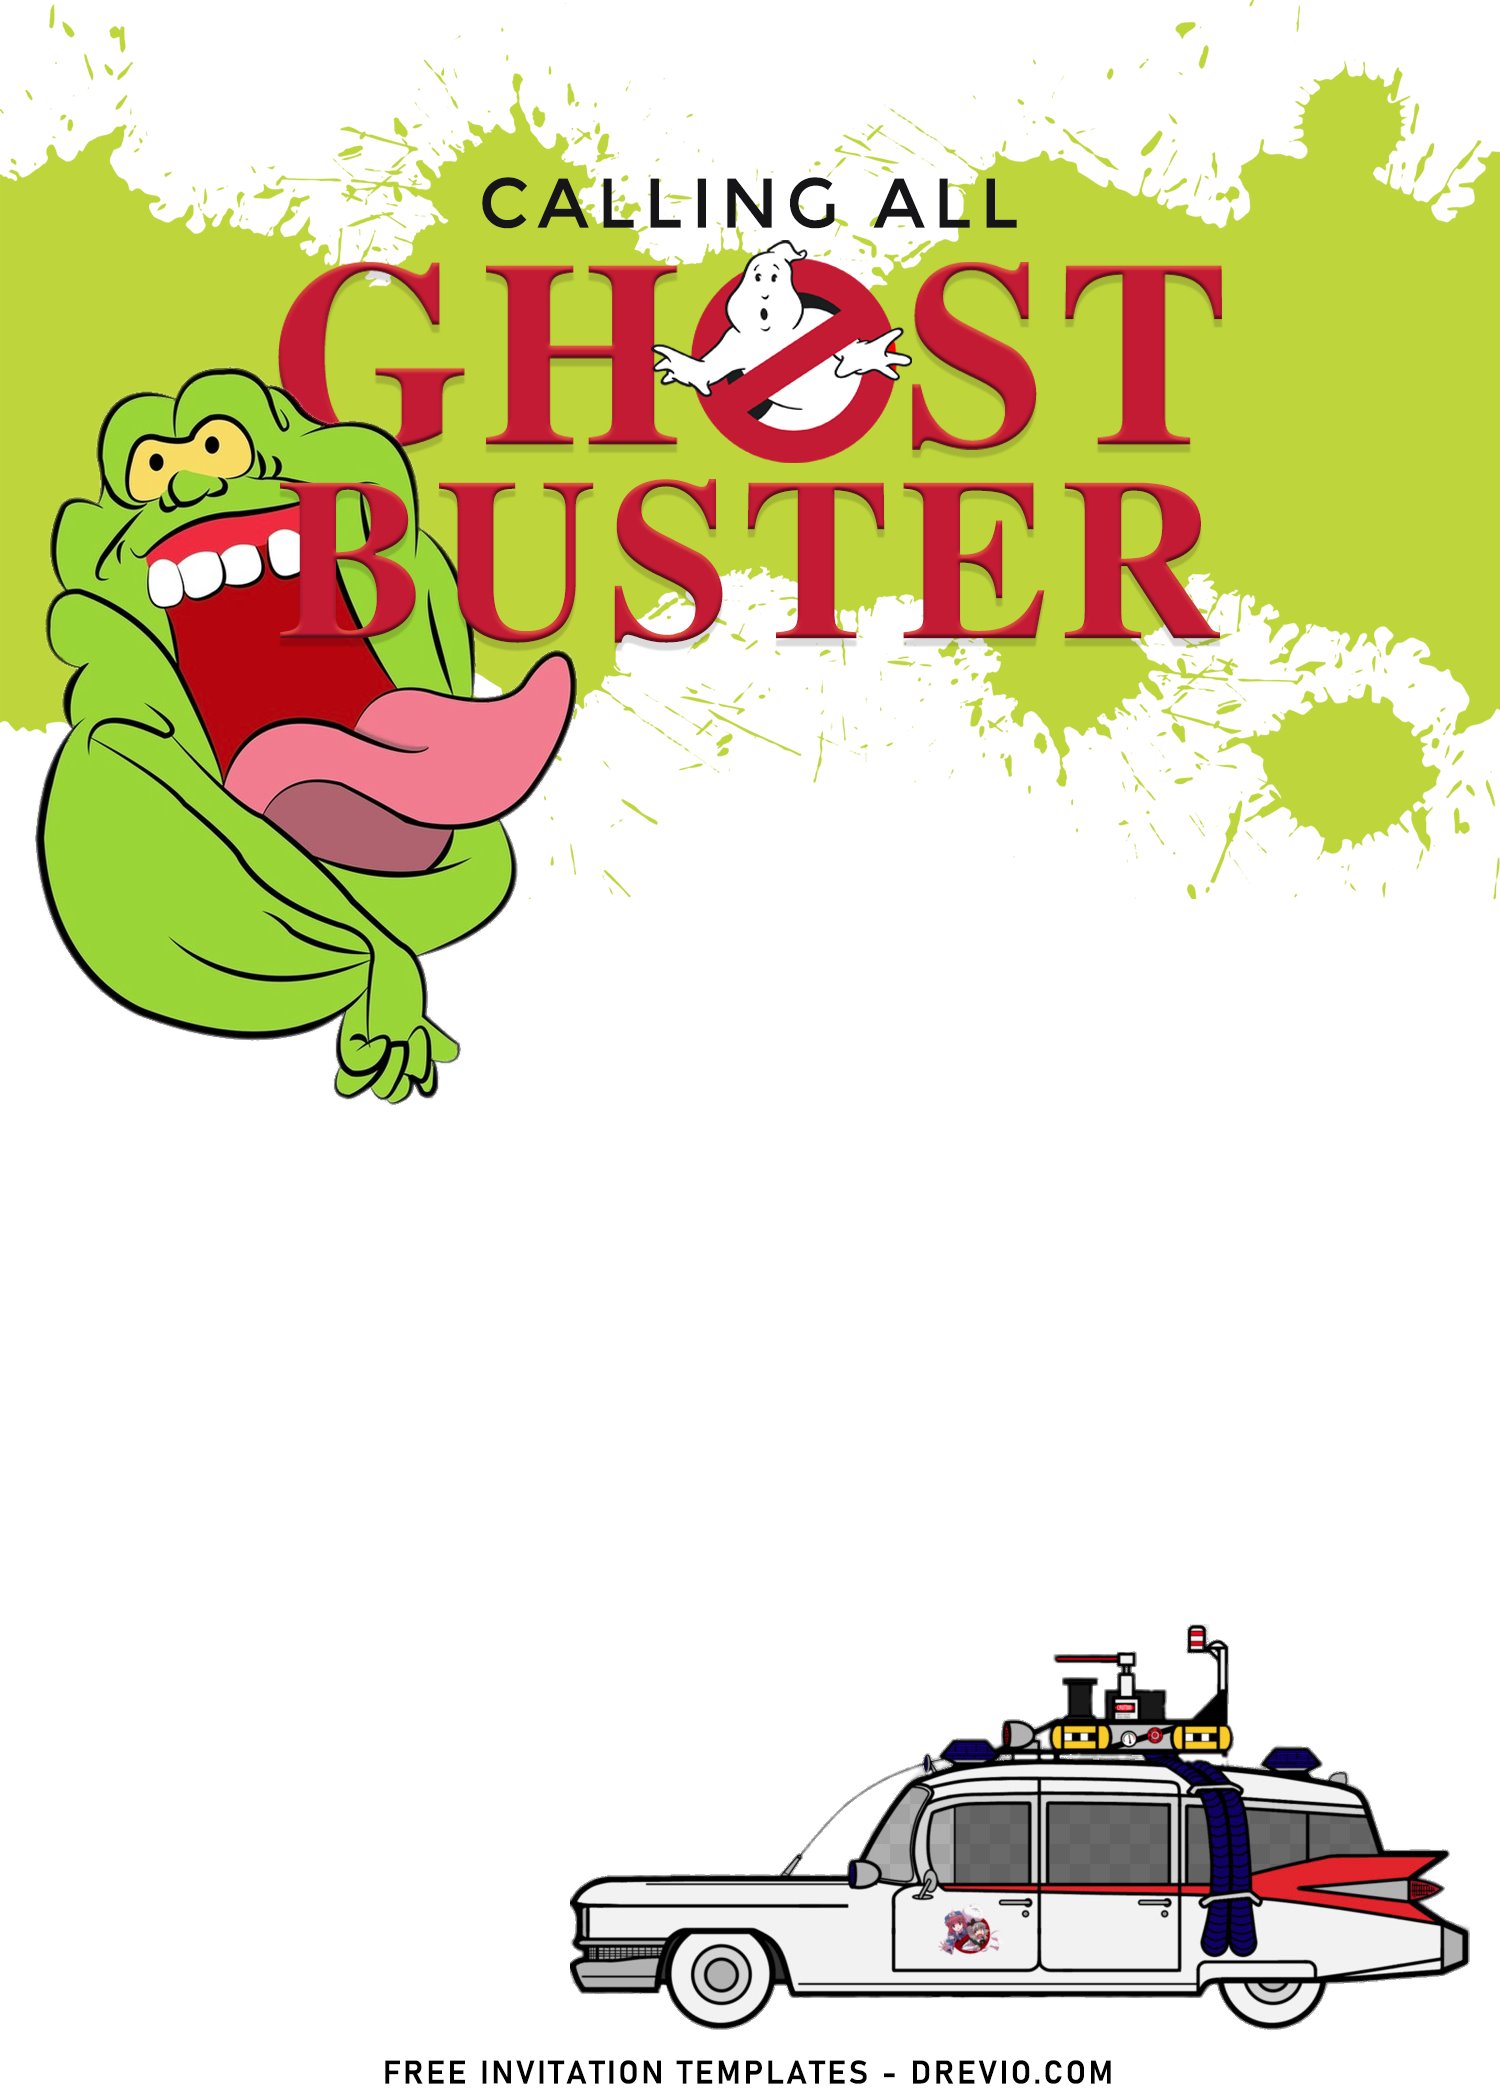 11 Ghostbuster Birthday Invitation Templates With Ghostbuster Car 